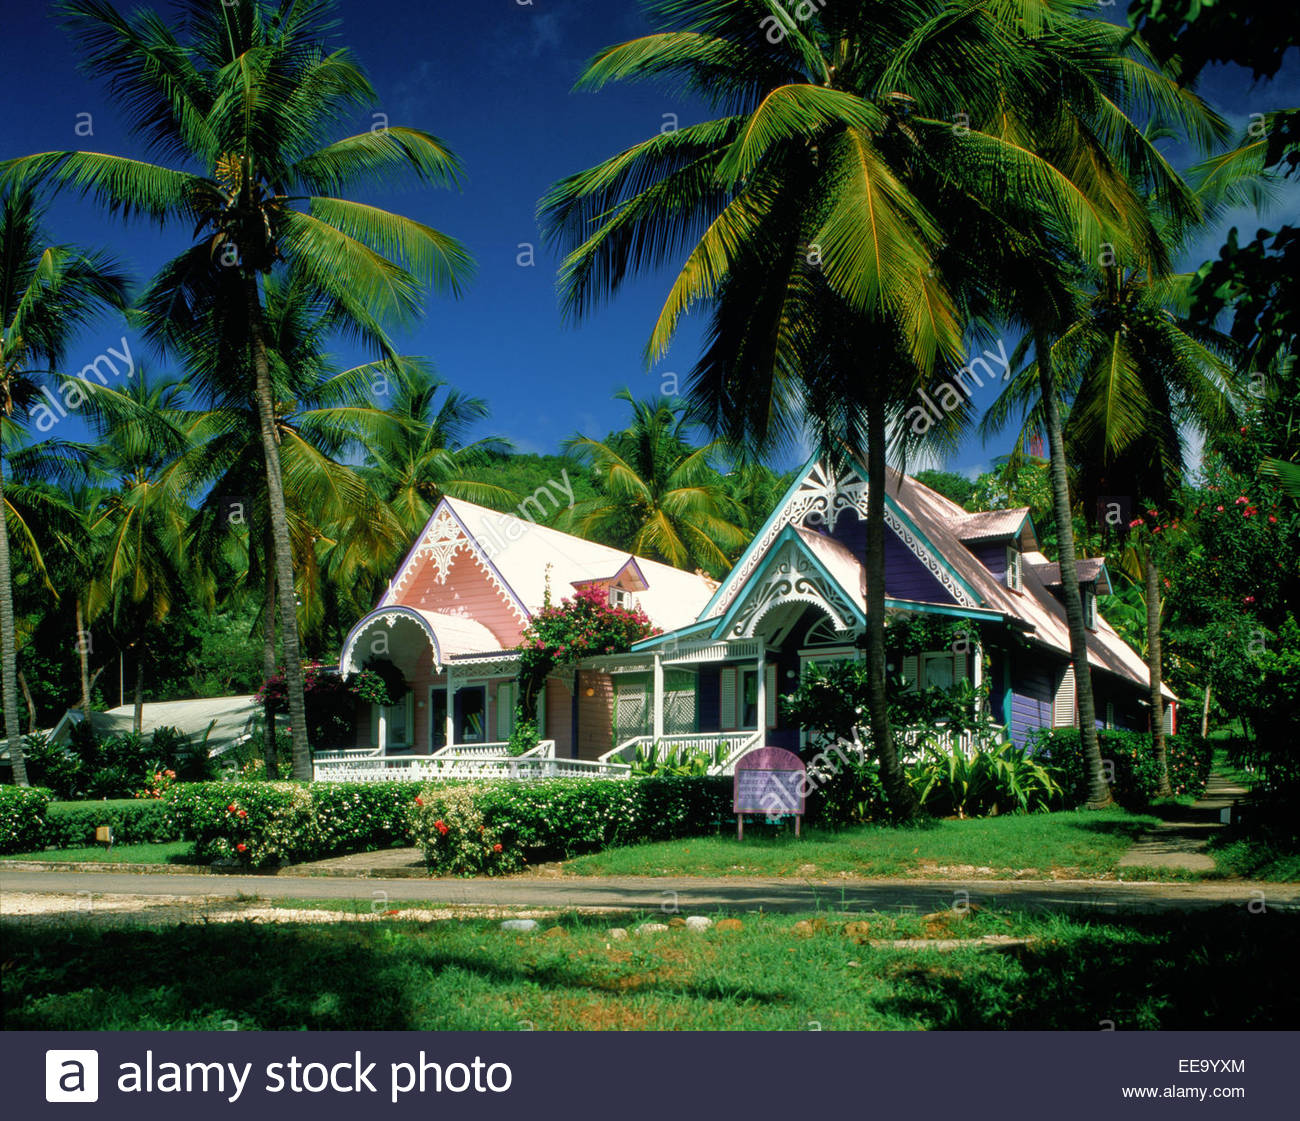 house-with-palms-on-the-island-mustique-